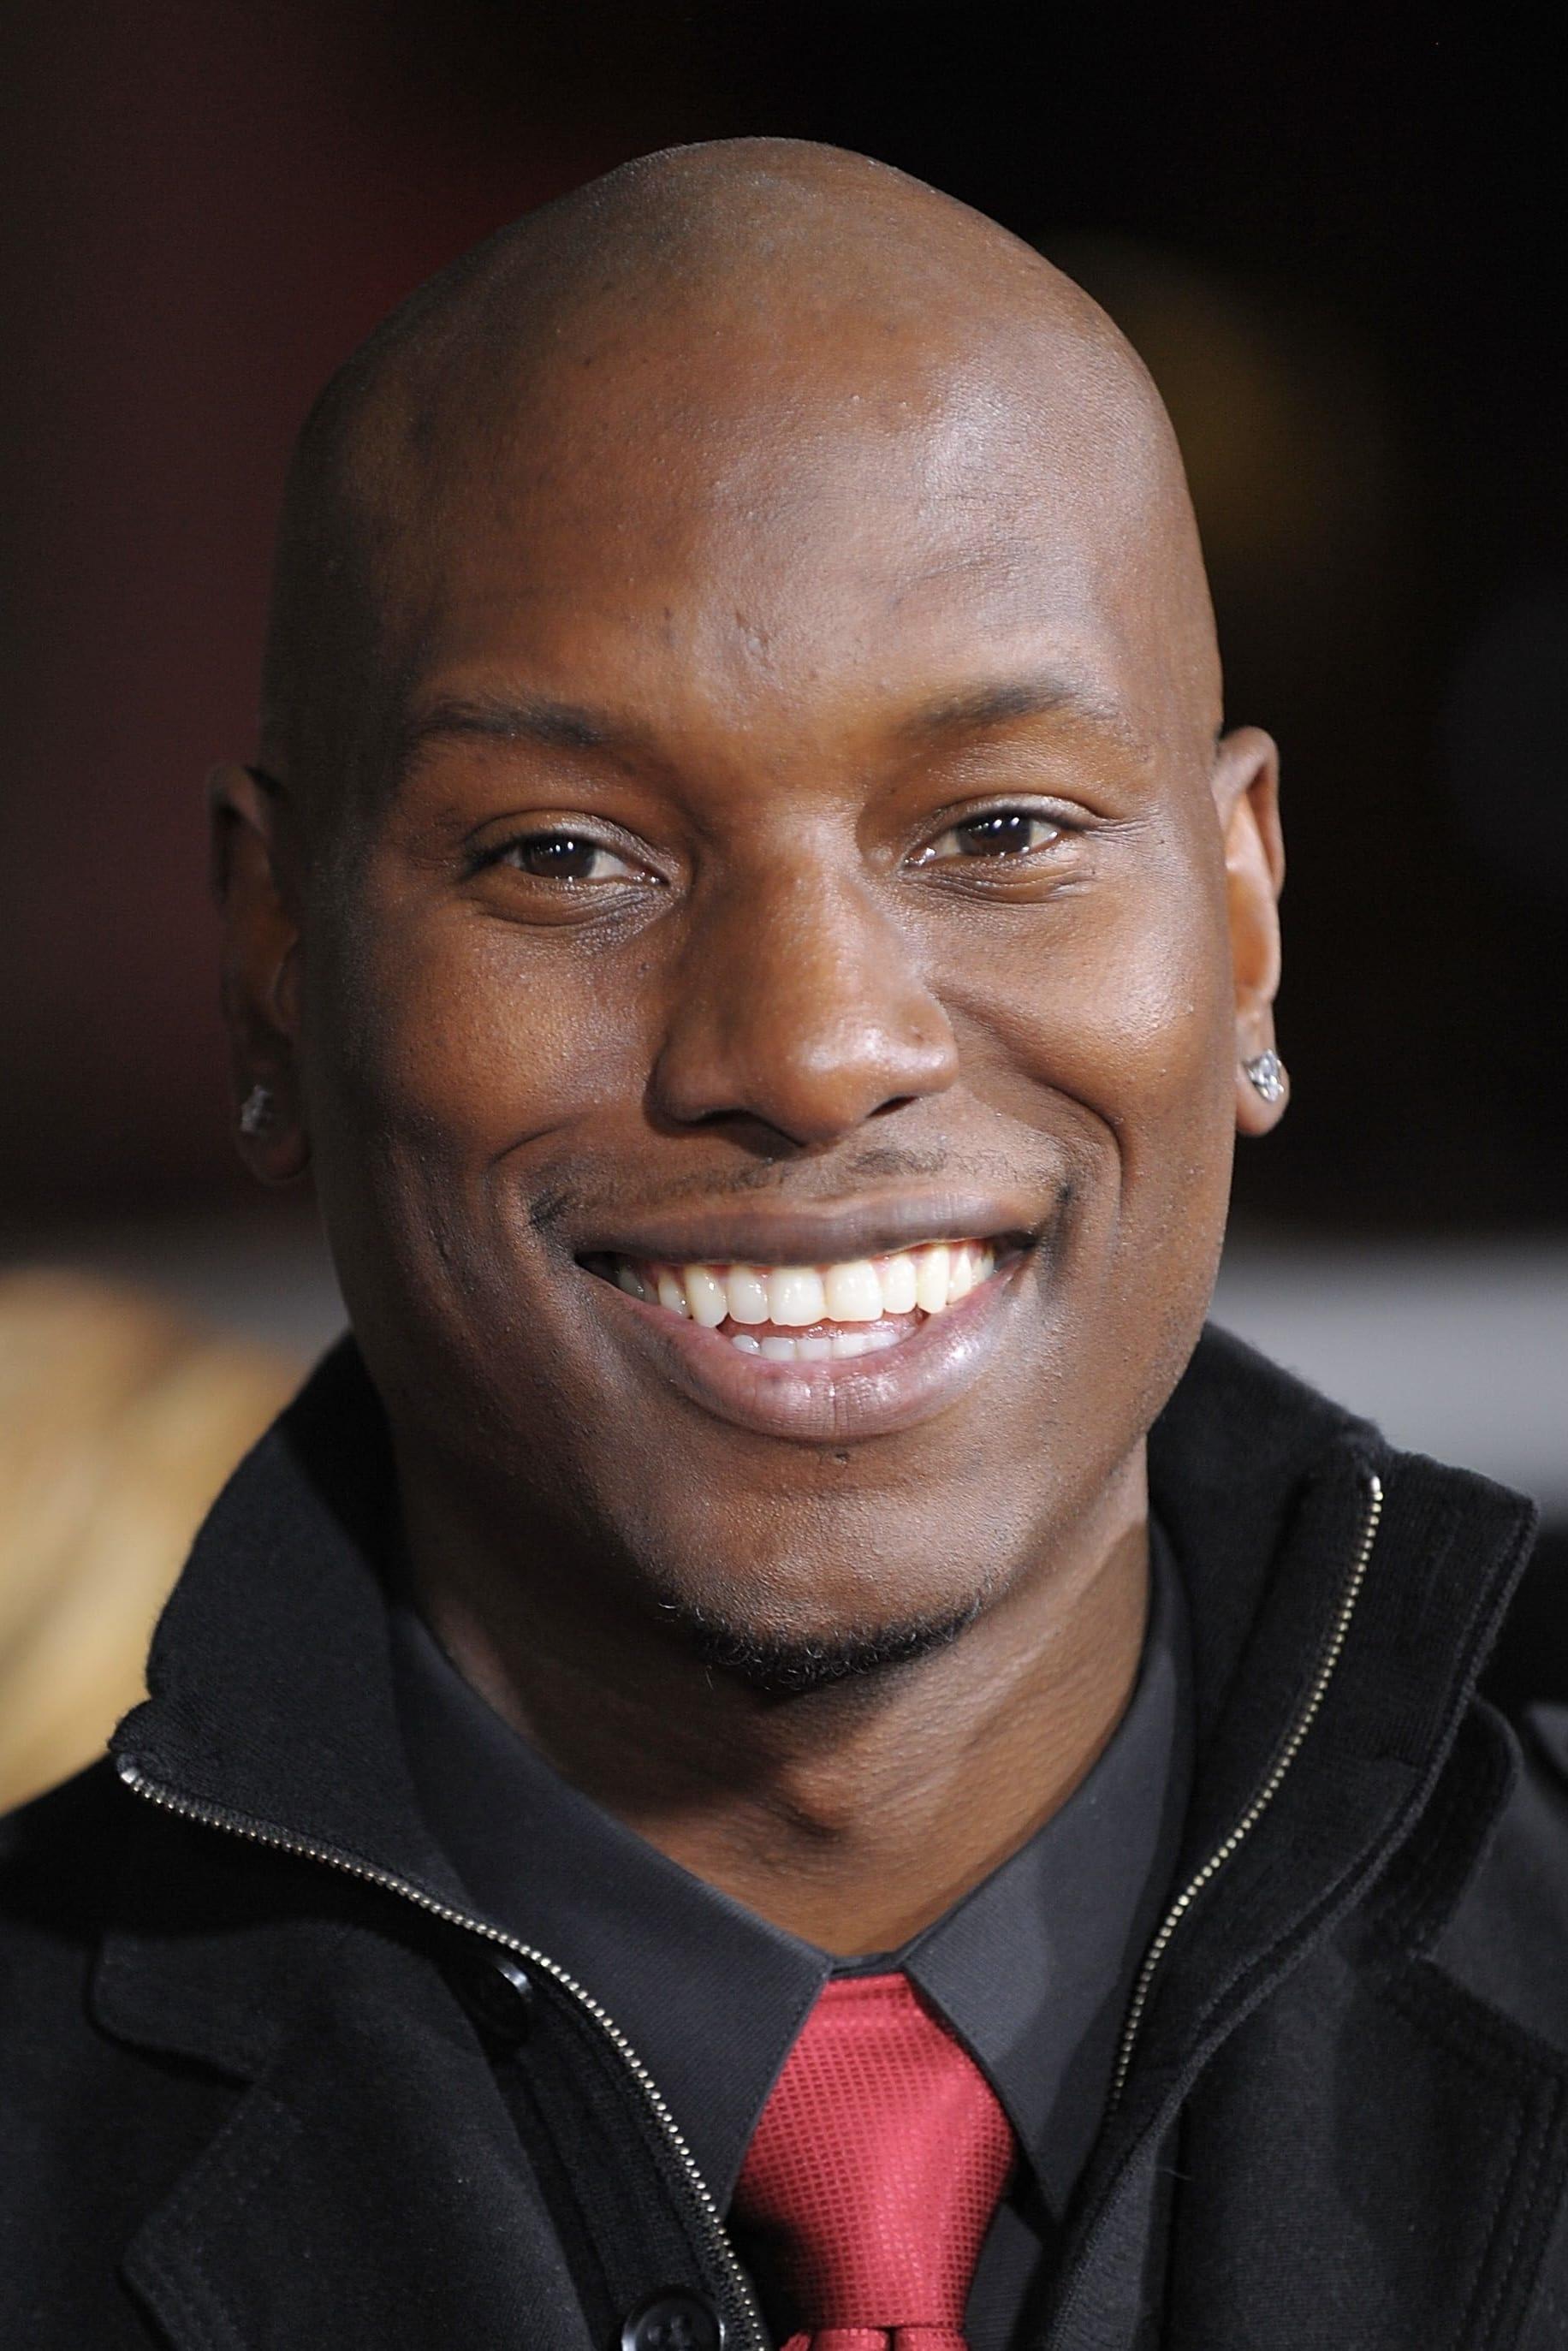 Tyrese Gibson poster